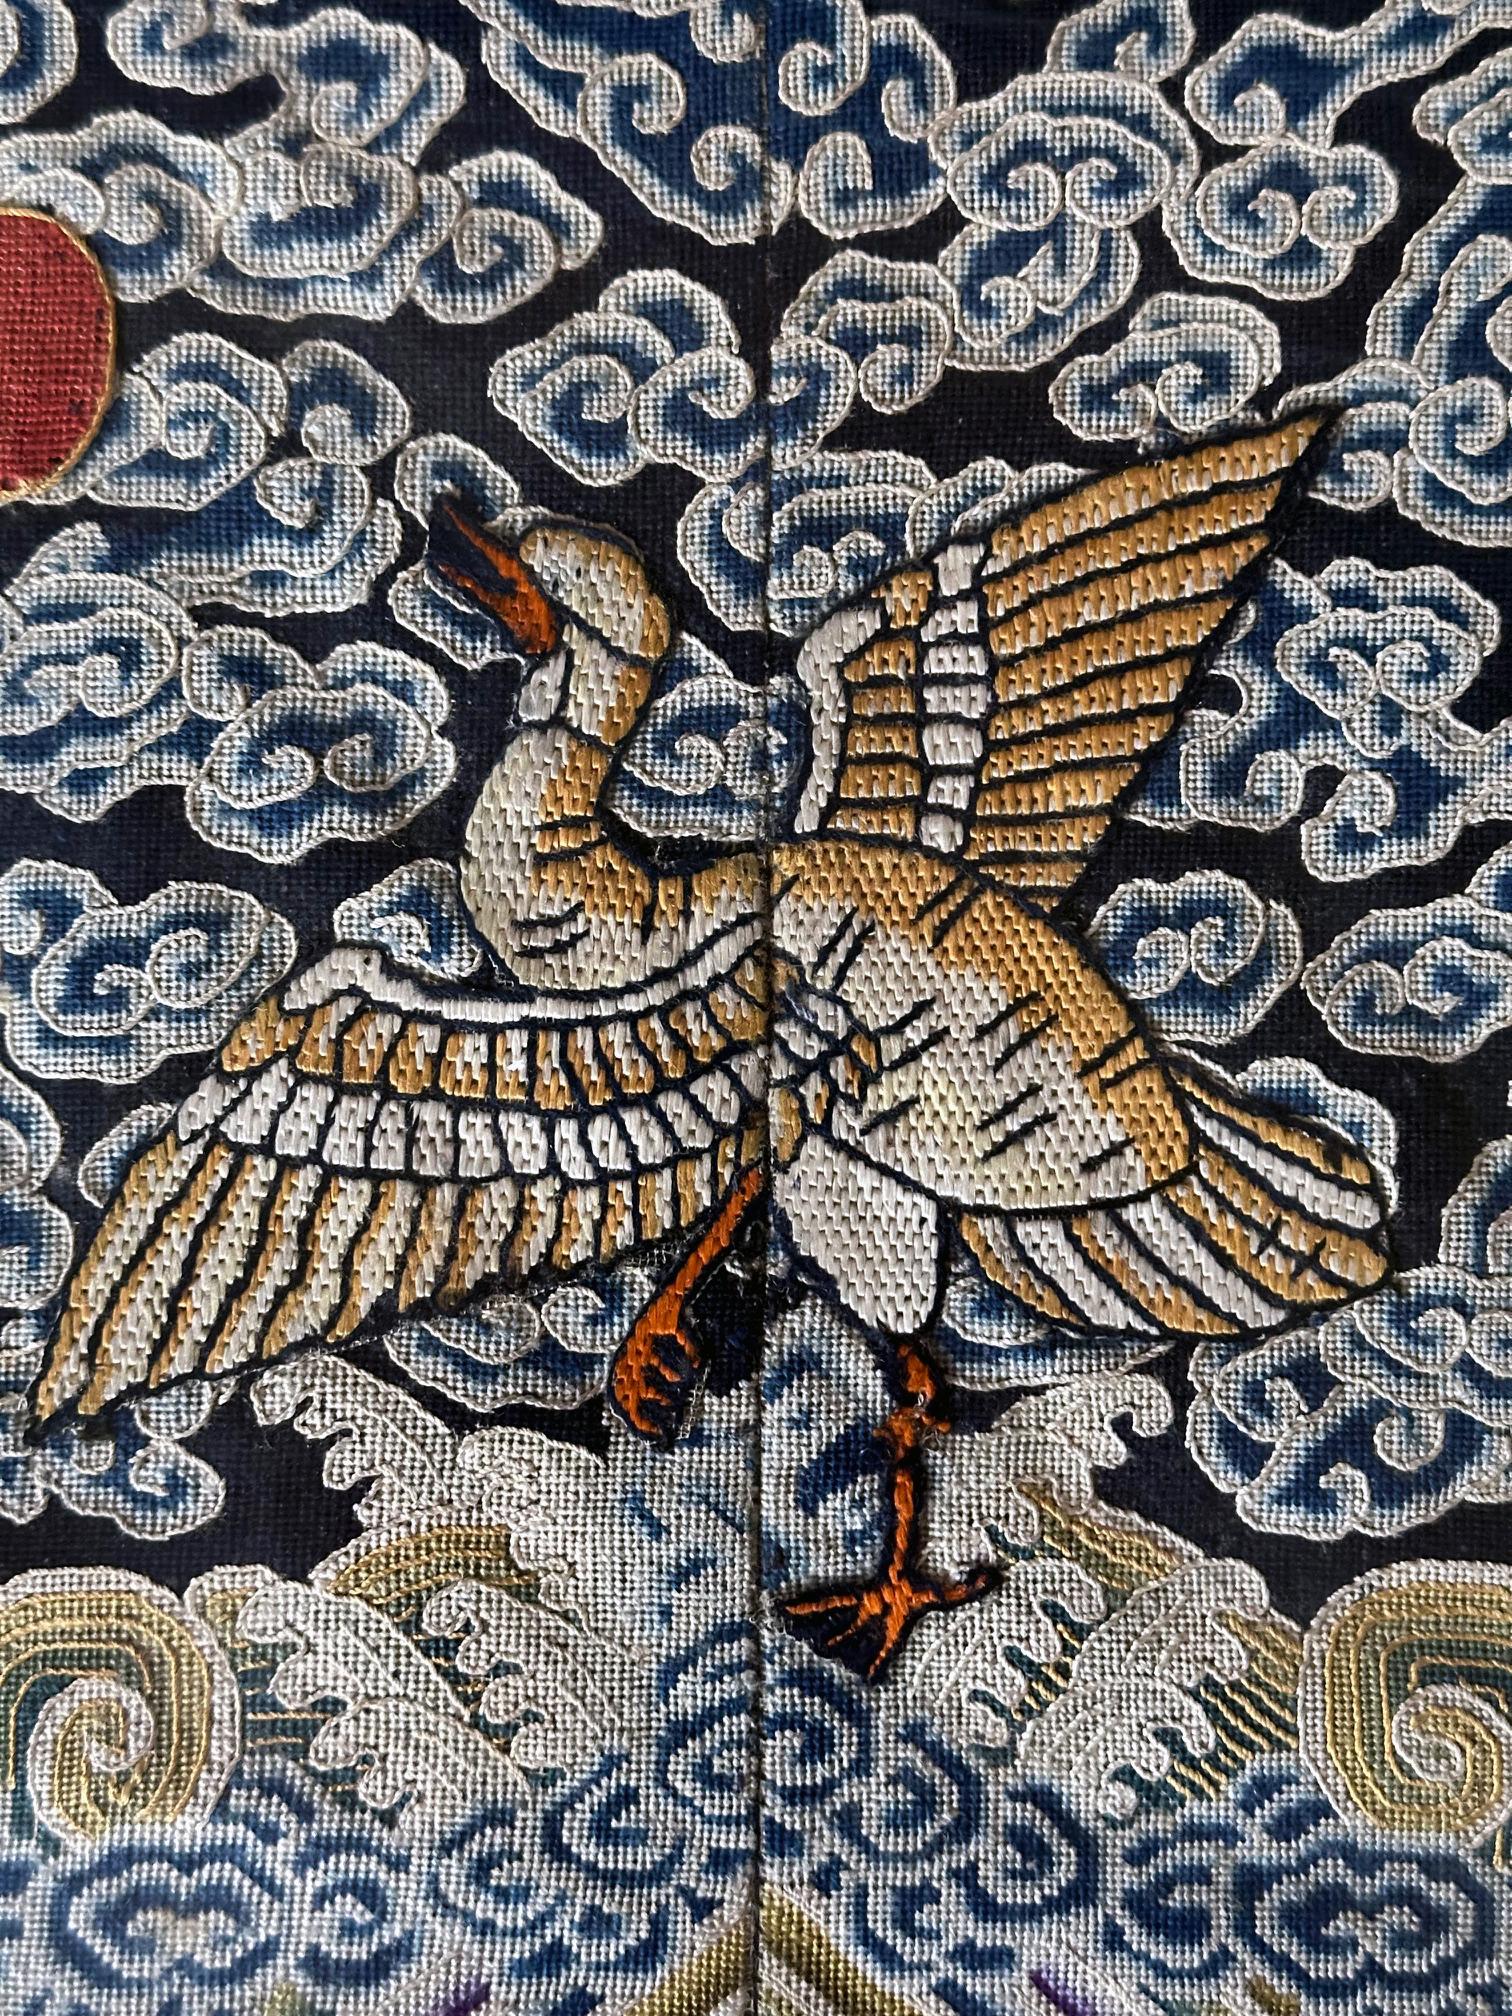 A fine silk kesi civil rank badge panel (known in Chinese as Buzi) framed and glazed. The fourth rank panel feature borders of fret archaic key and are centered by the insignia bird wild goose, which is the symbol of the fourth rank civil official